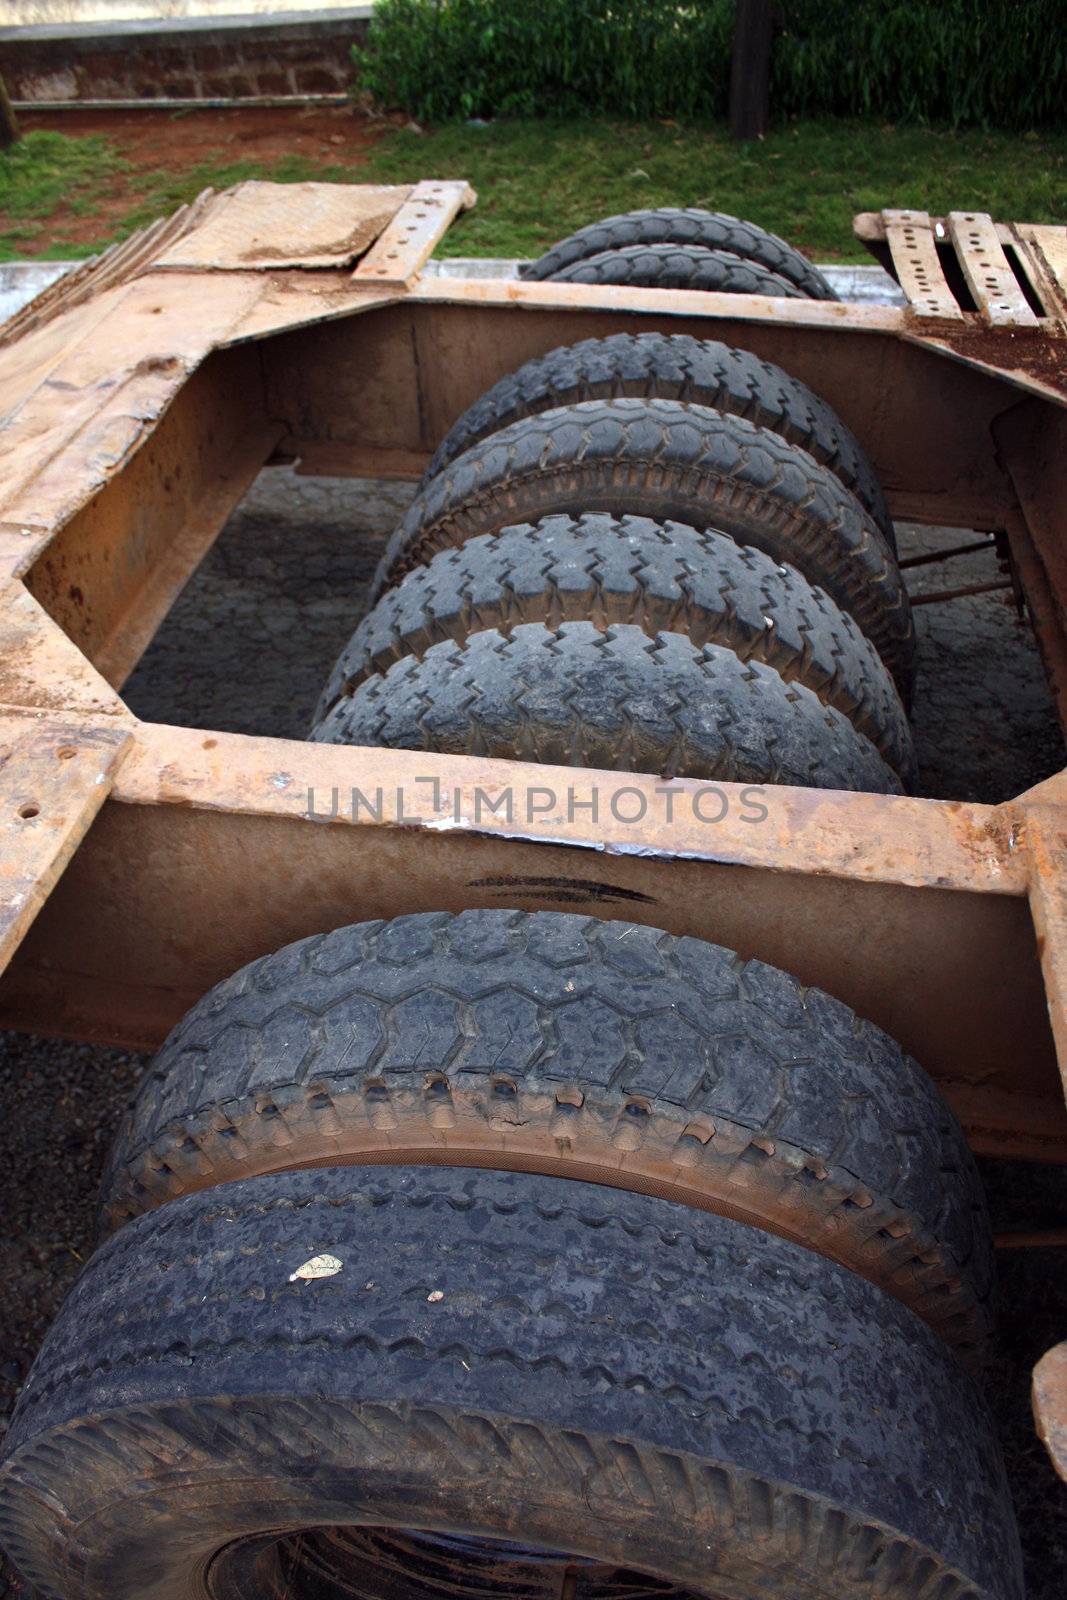 The tires in a huge truck trailer.